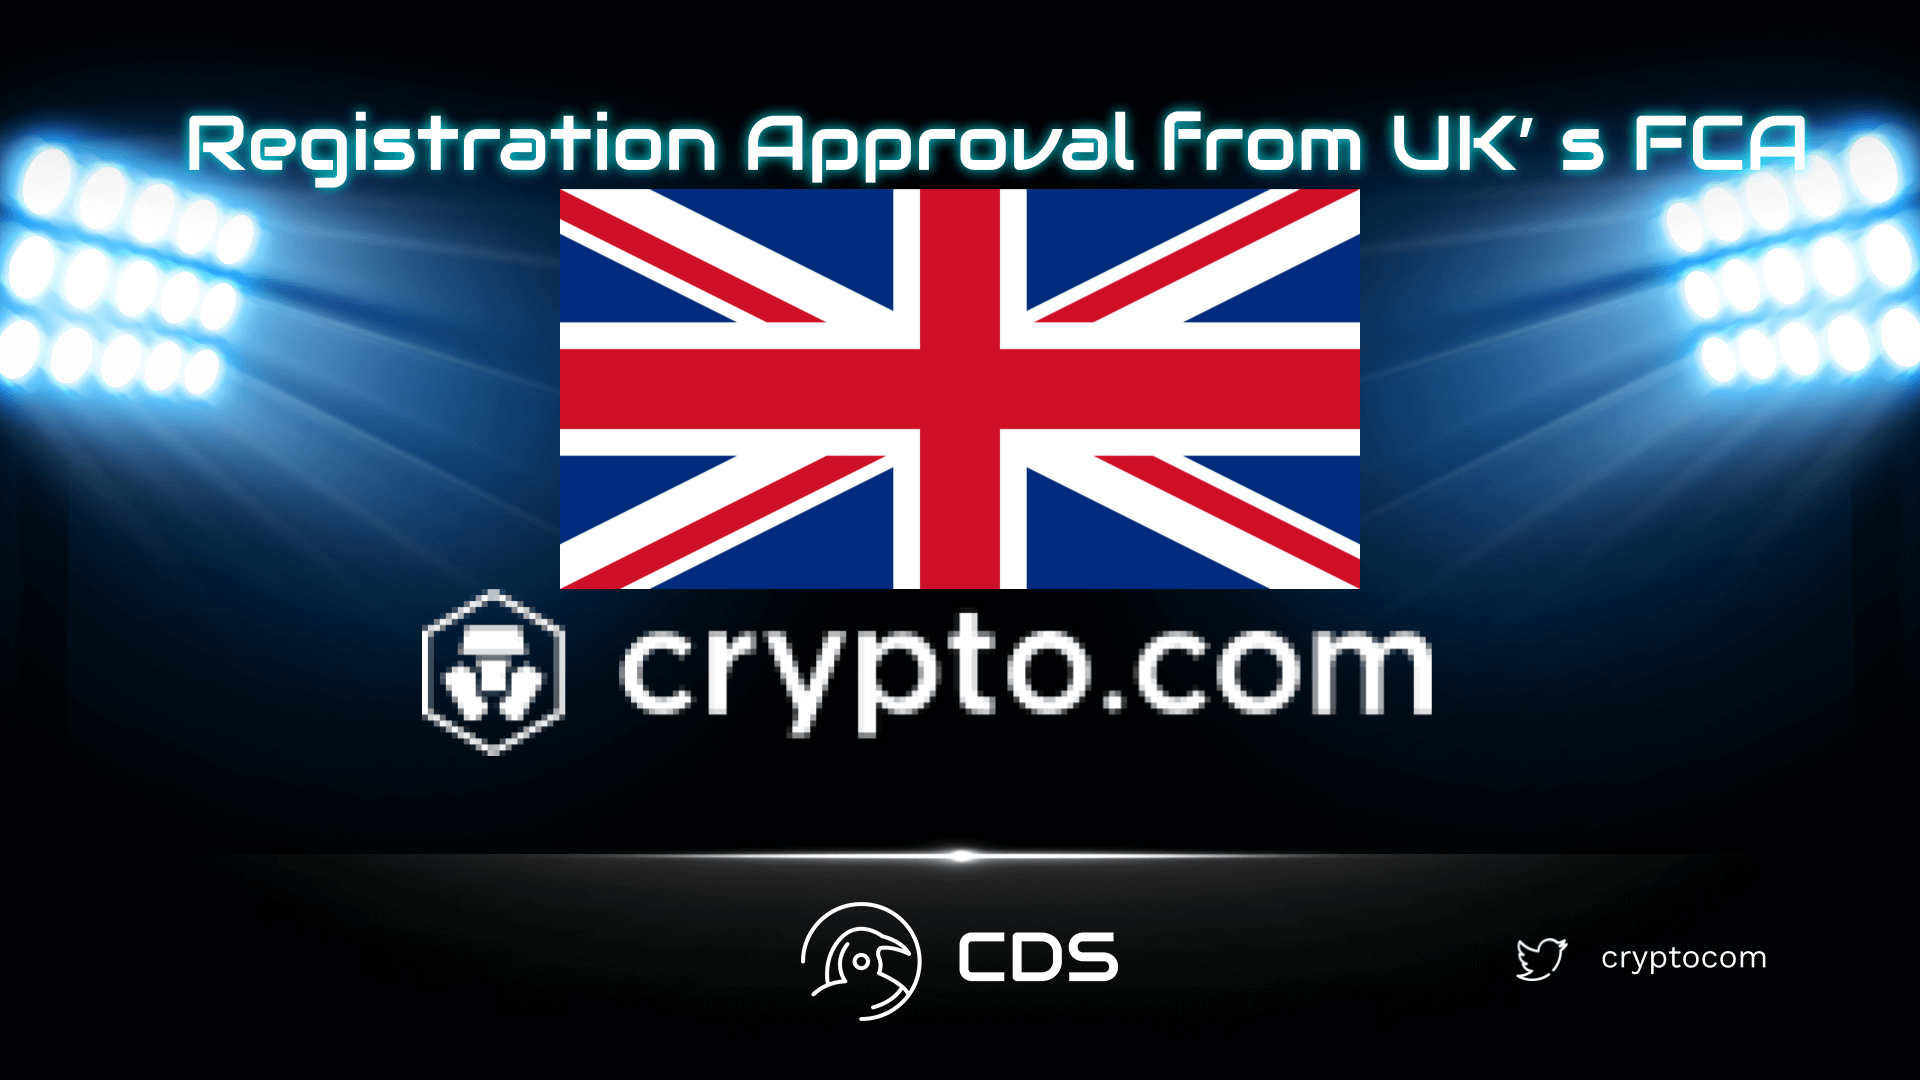 crypto.com approval from uk